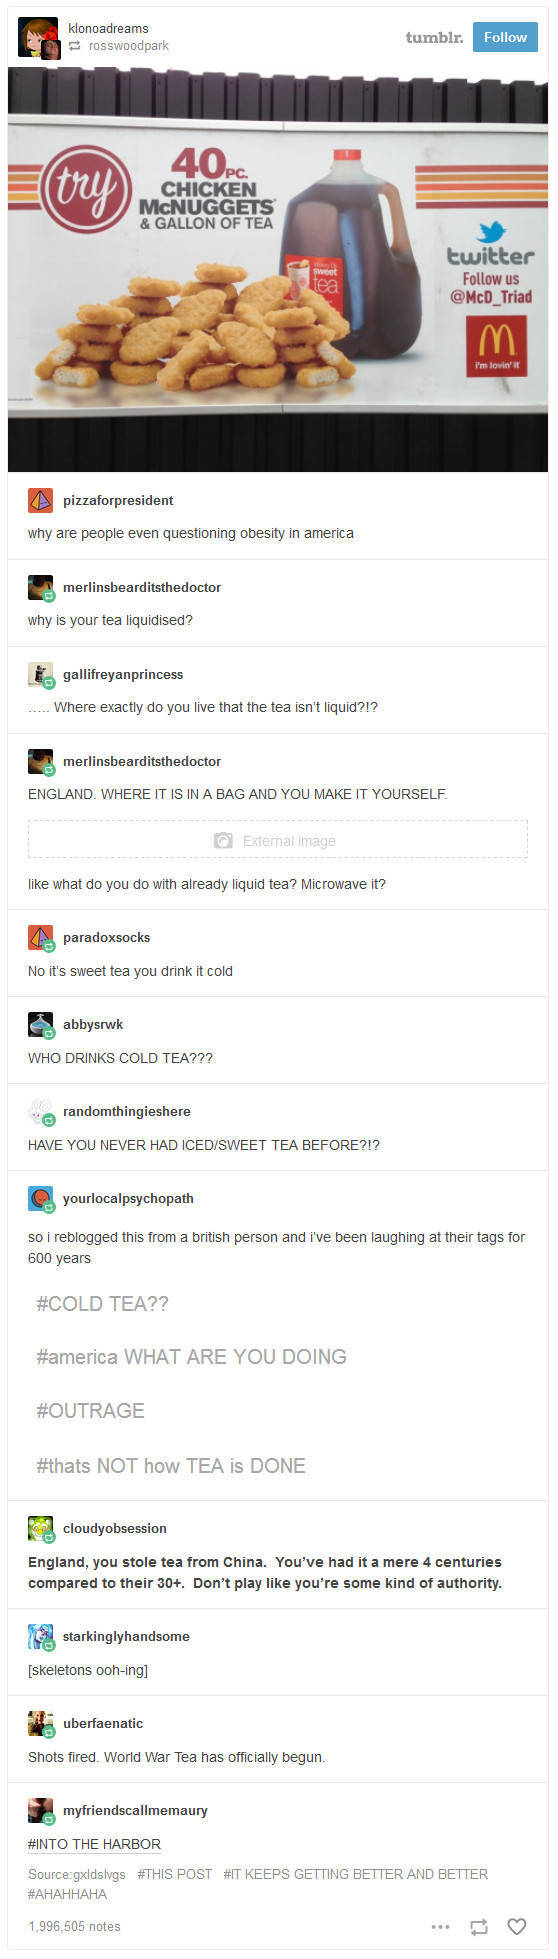 Tumblr Proves US To Be Almost Another World Compared To Any Other Country